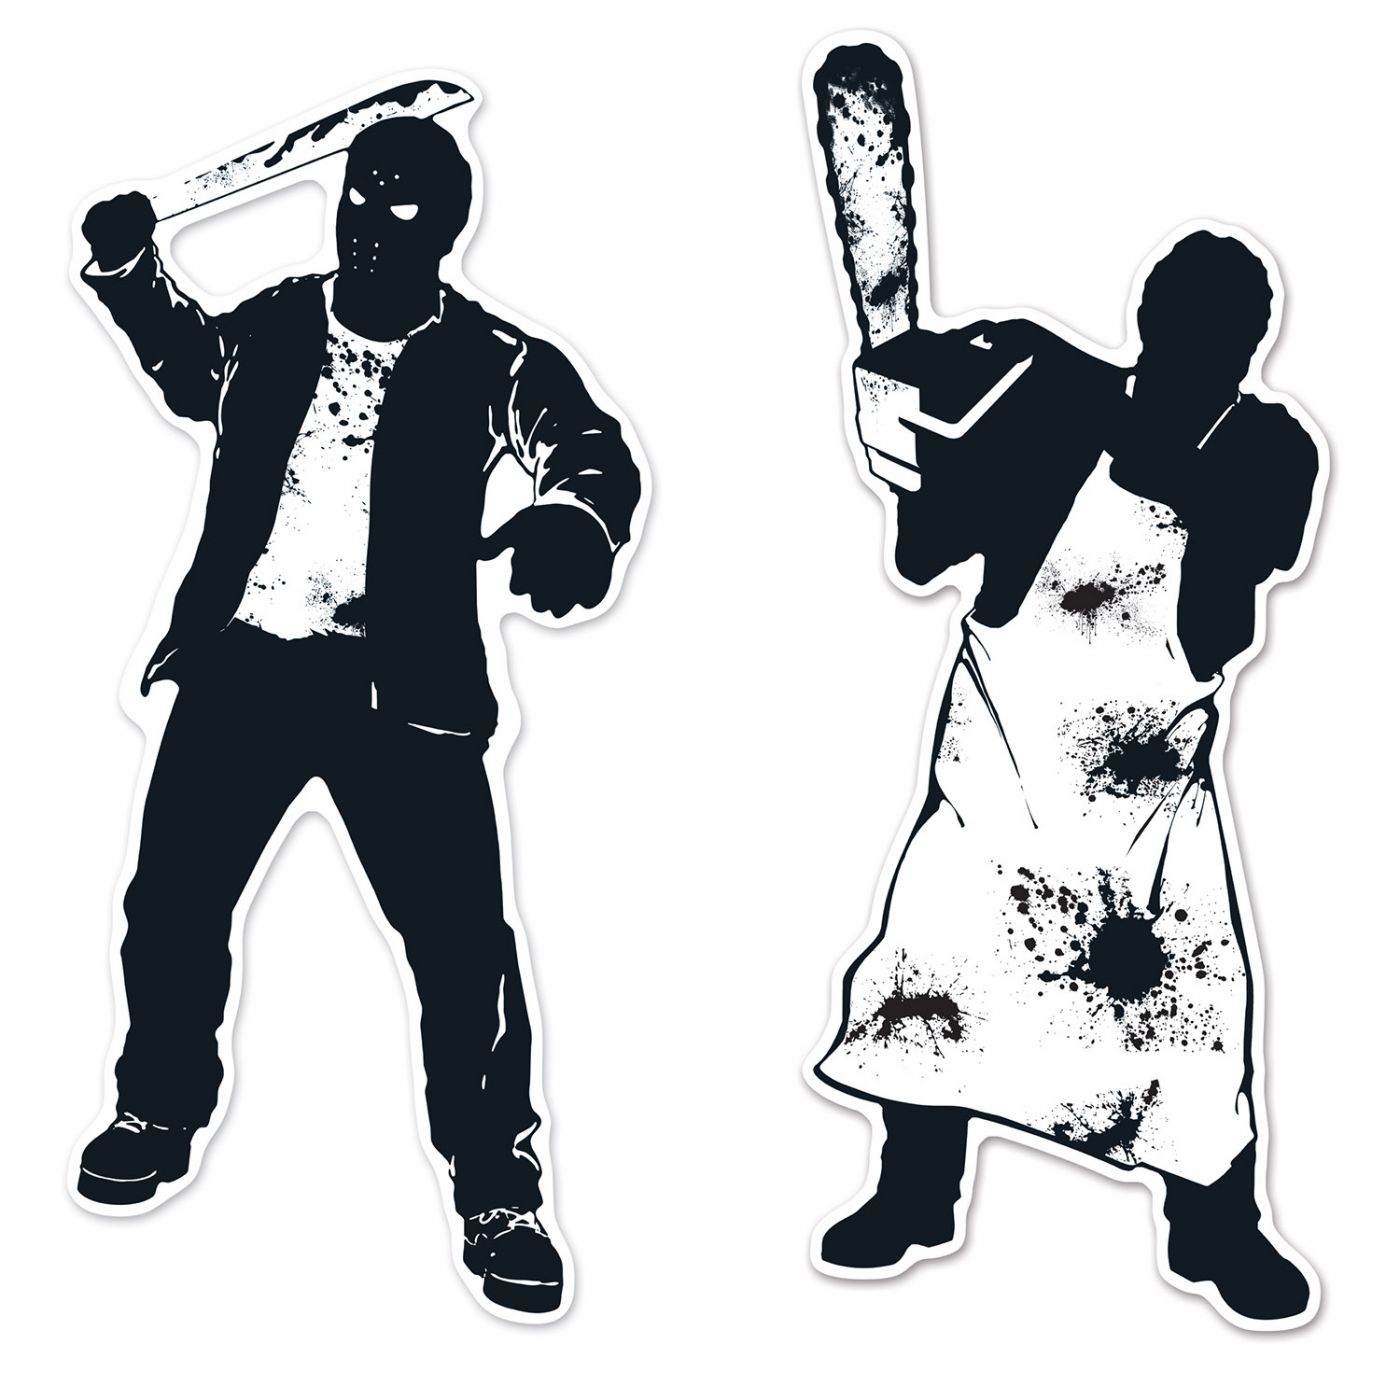 Psycho Silhouettes image